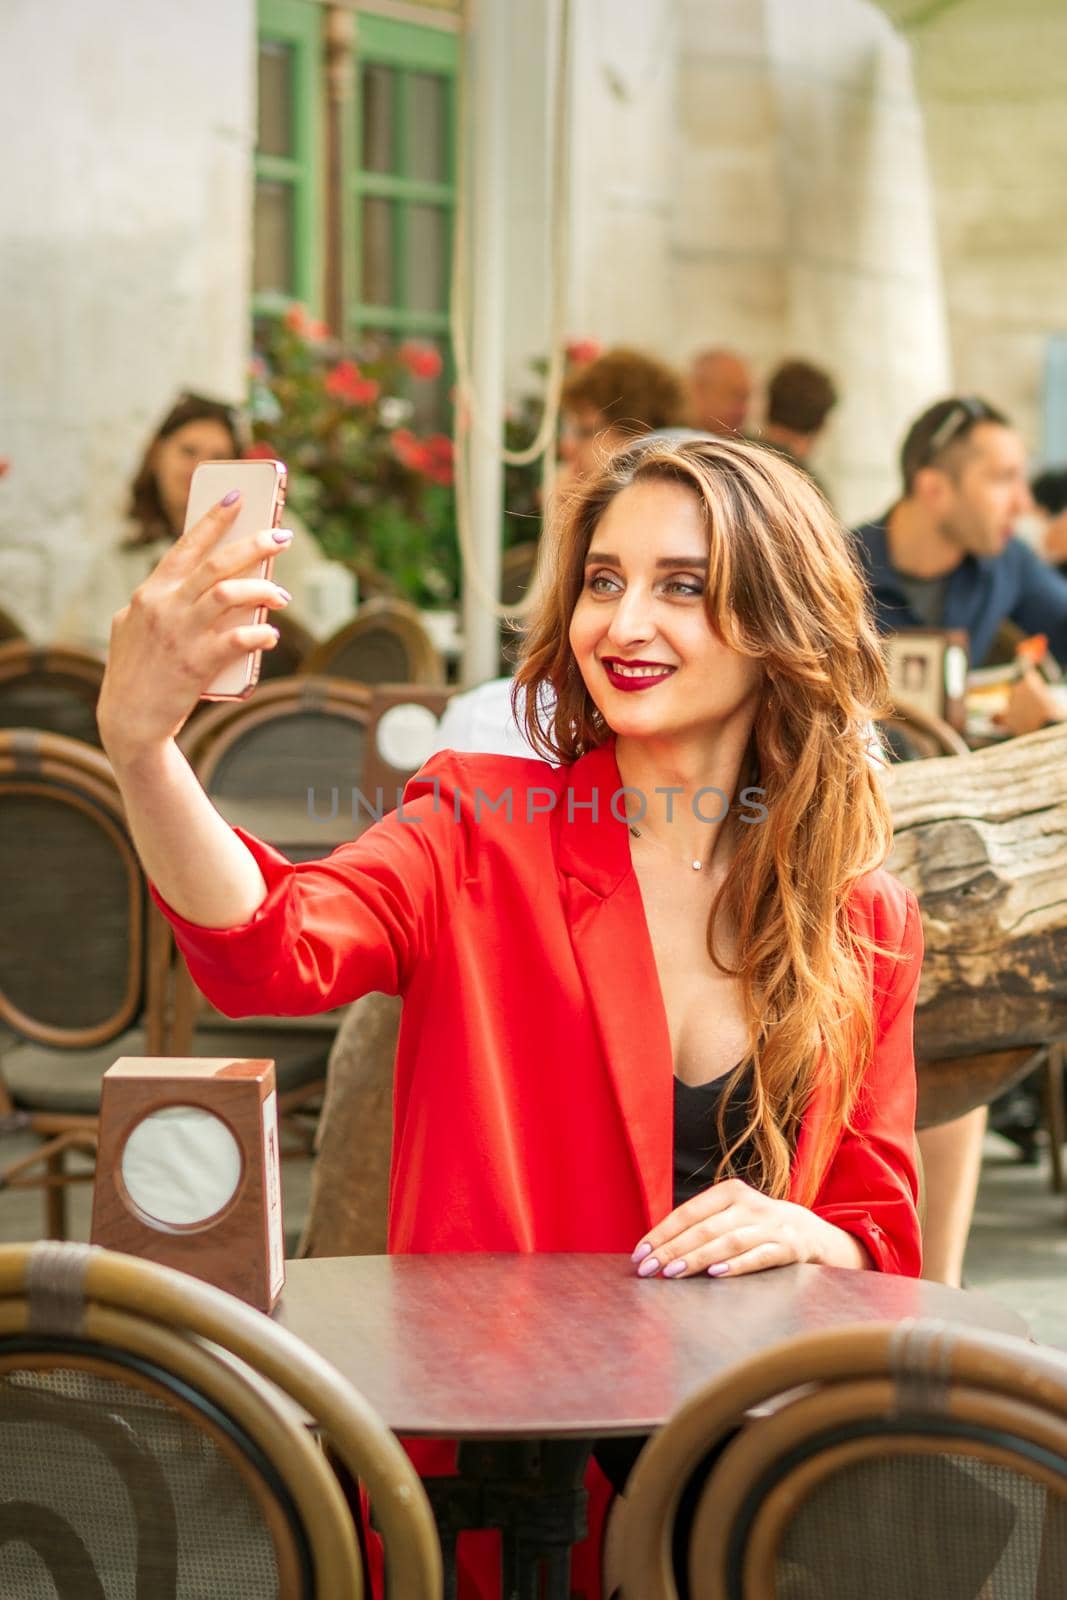 Tourist young caucasian woman in a red jacket with suitcase takes a selfie at the table in cafe outdoors